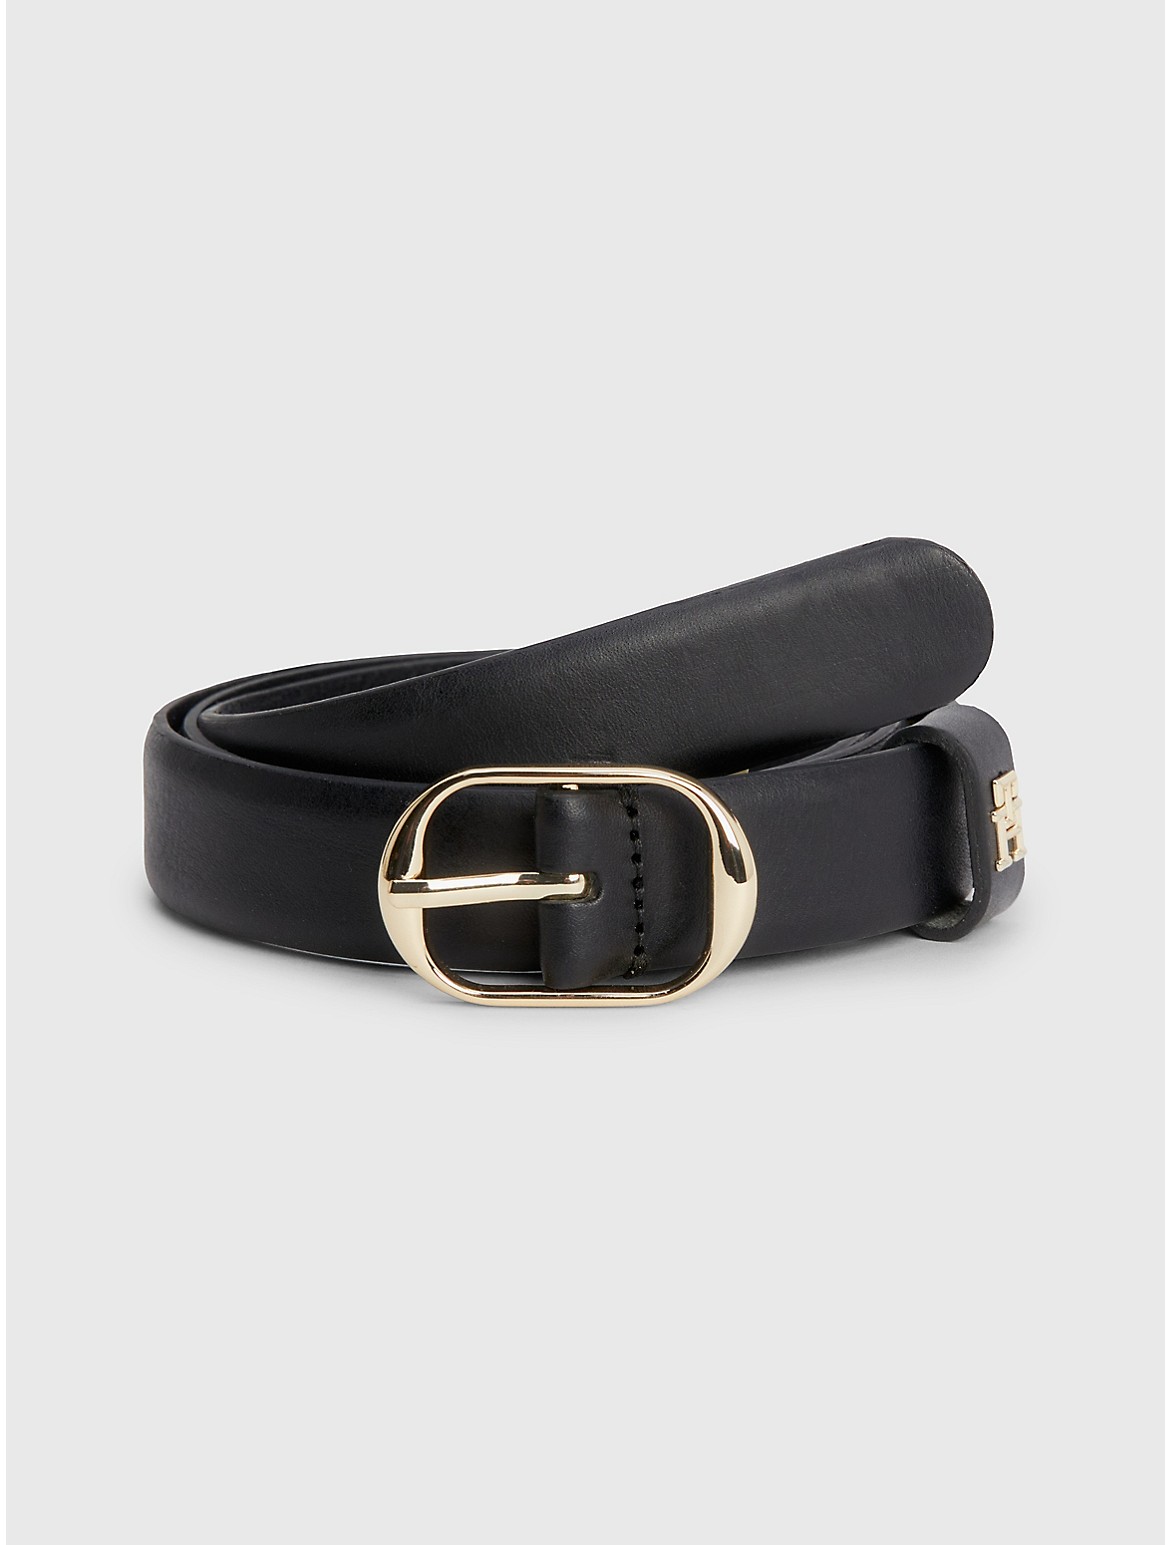 TOMMY HILFIGER TH CASUAL LEATHER BELT